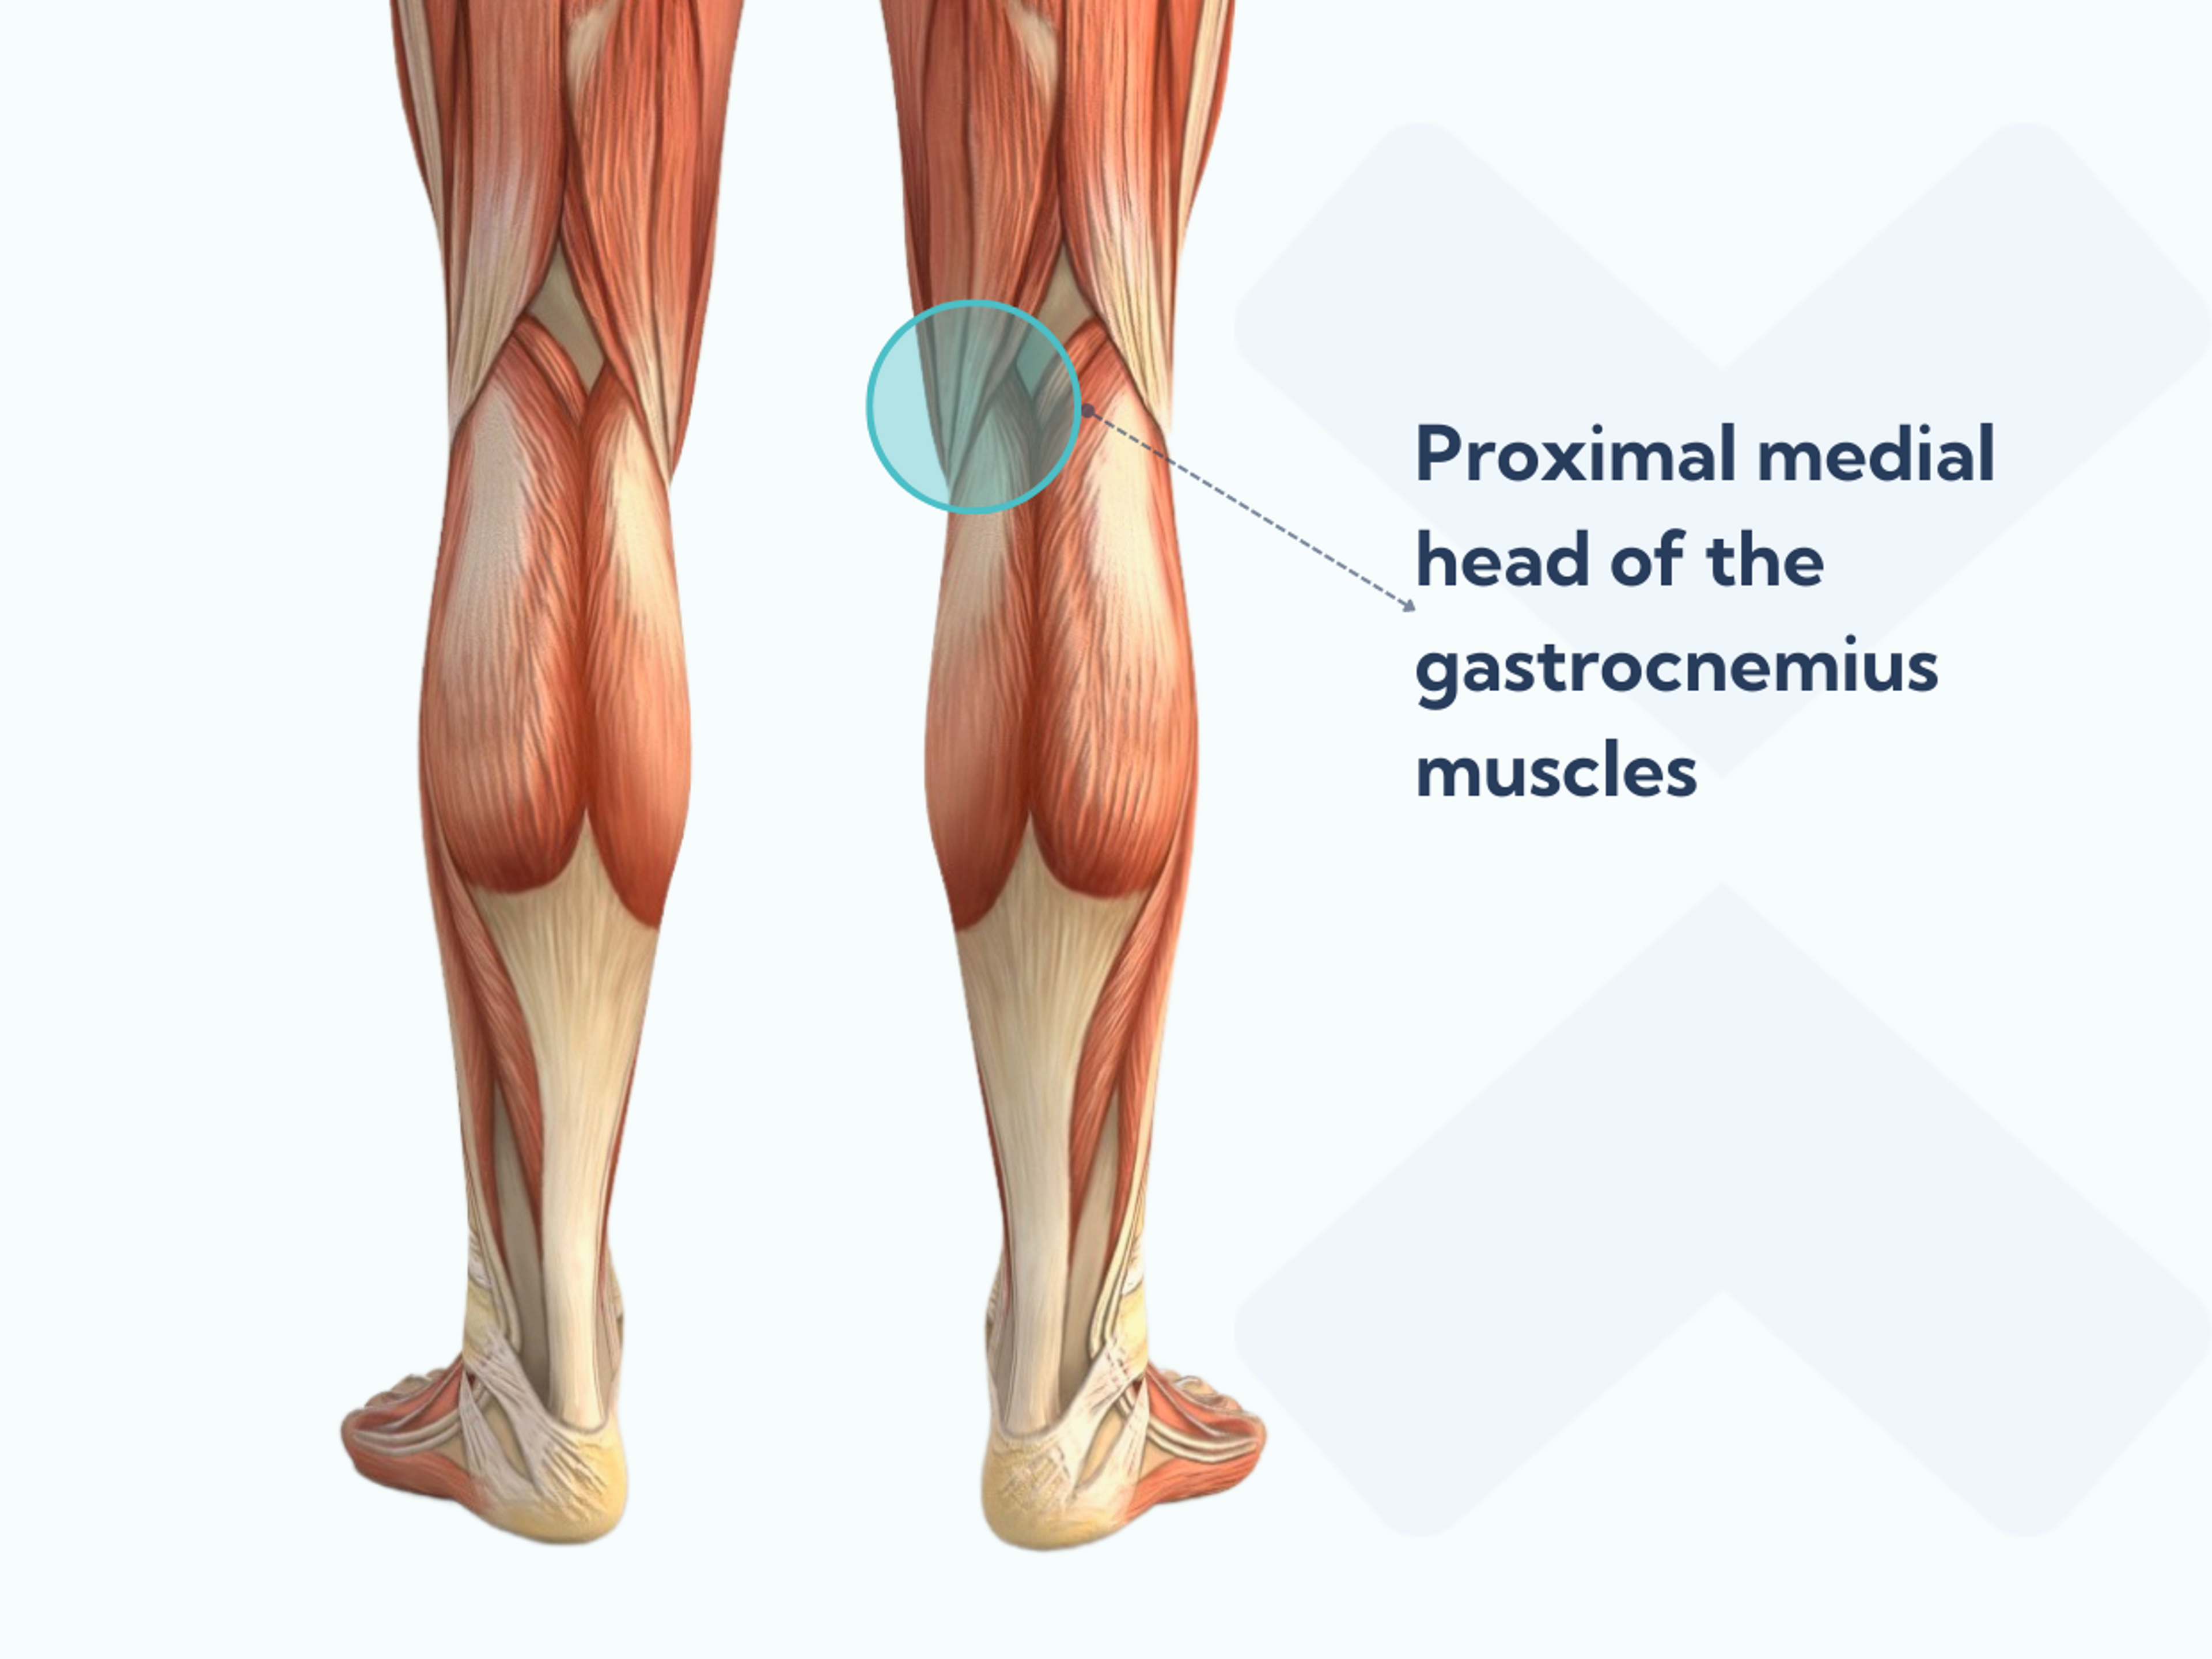 Isolated medial proximal gastrocnemius release surgery for plantar fasciitis involves them cutting the top inner part of the gastrocnemius muscle.